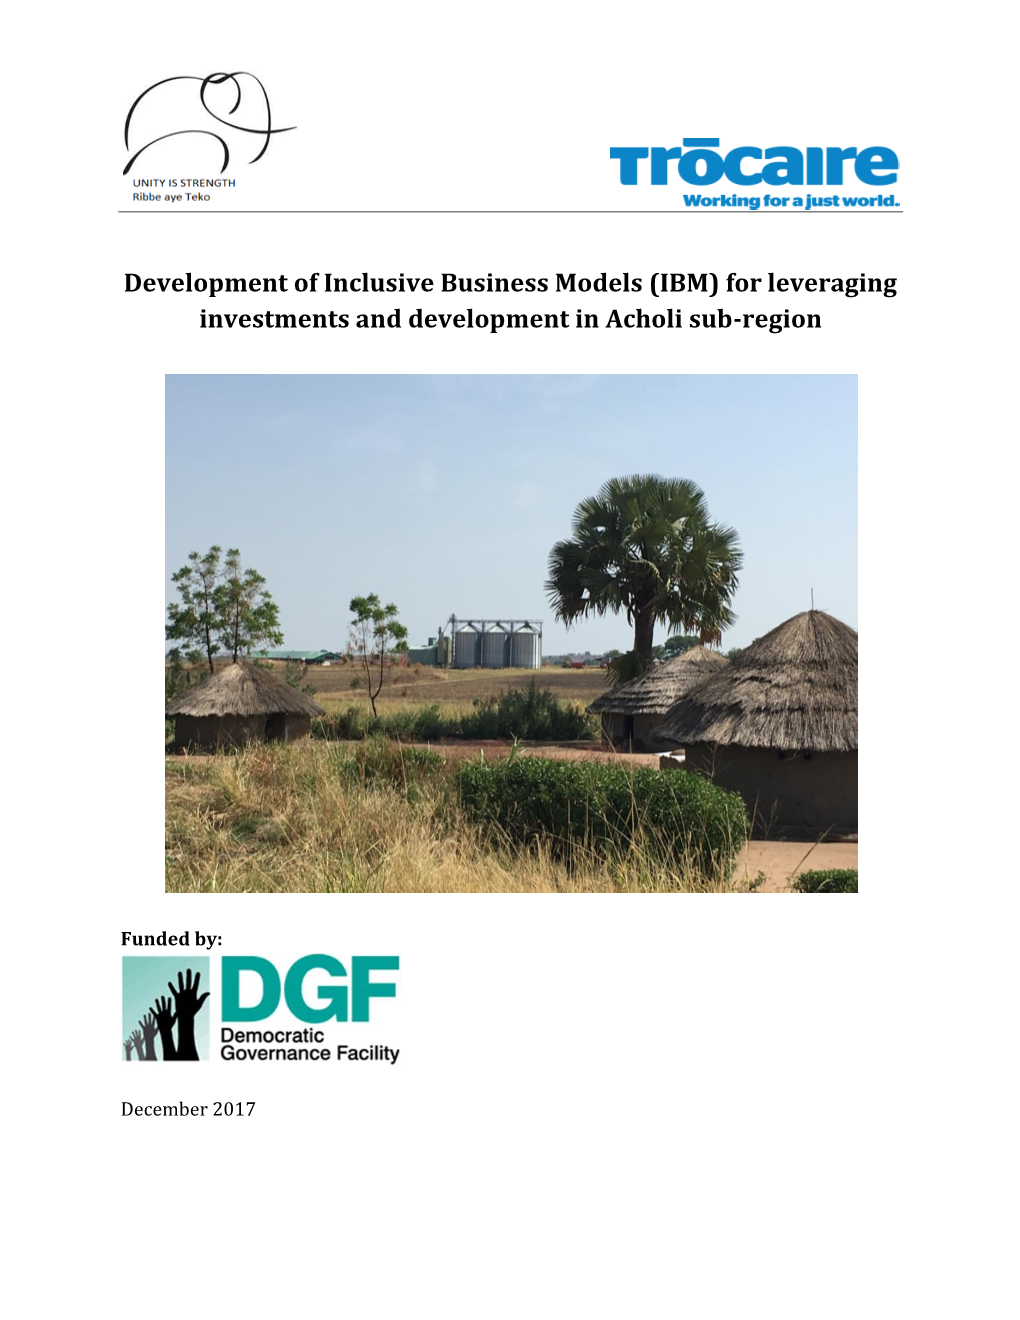 Development of Inclusive Business Models (IBM) for Leveraging Investments and Development in Acholi Sub-Region